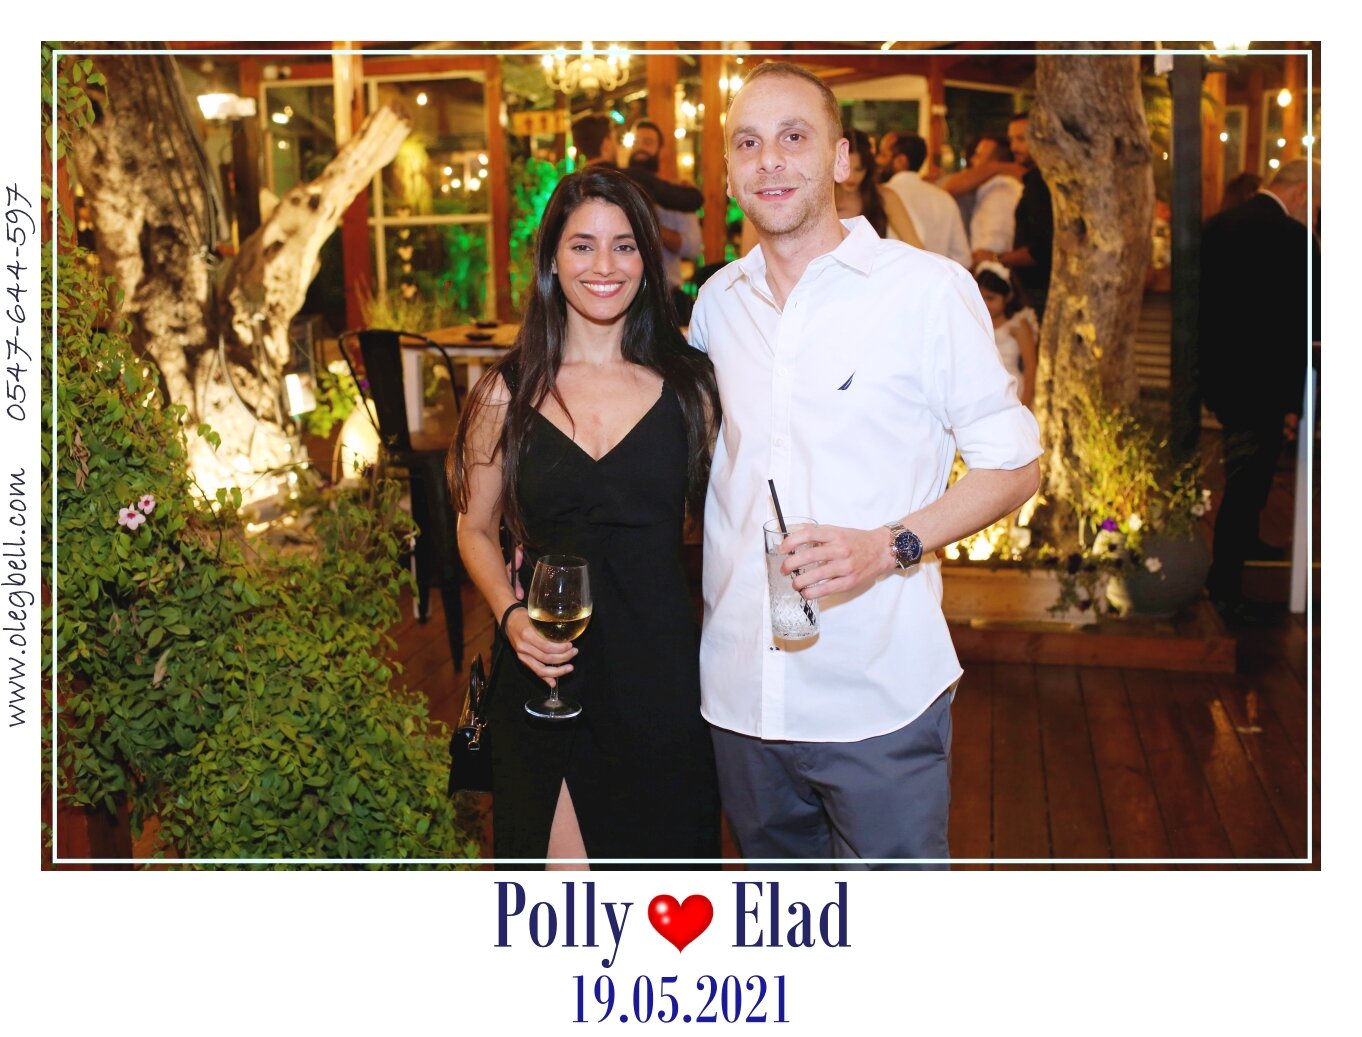 POLLY_AND_ELAD_WD_MG_SITE_011.JPG